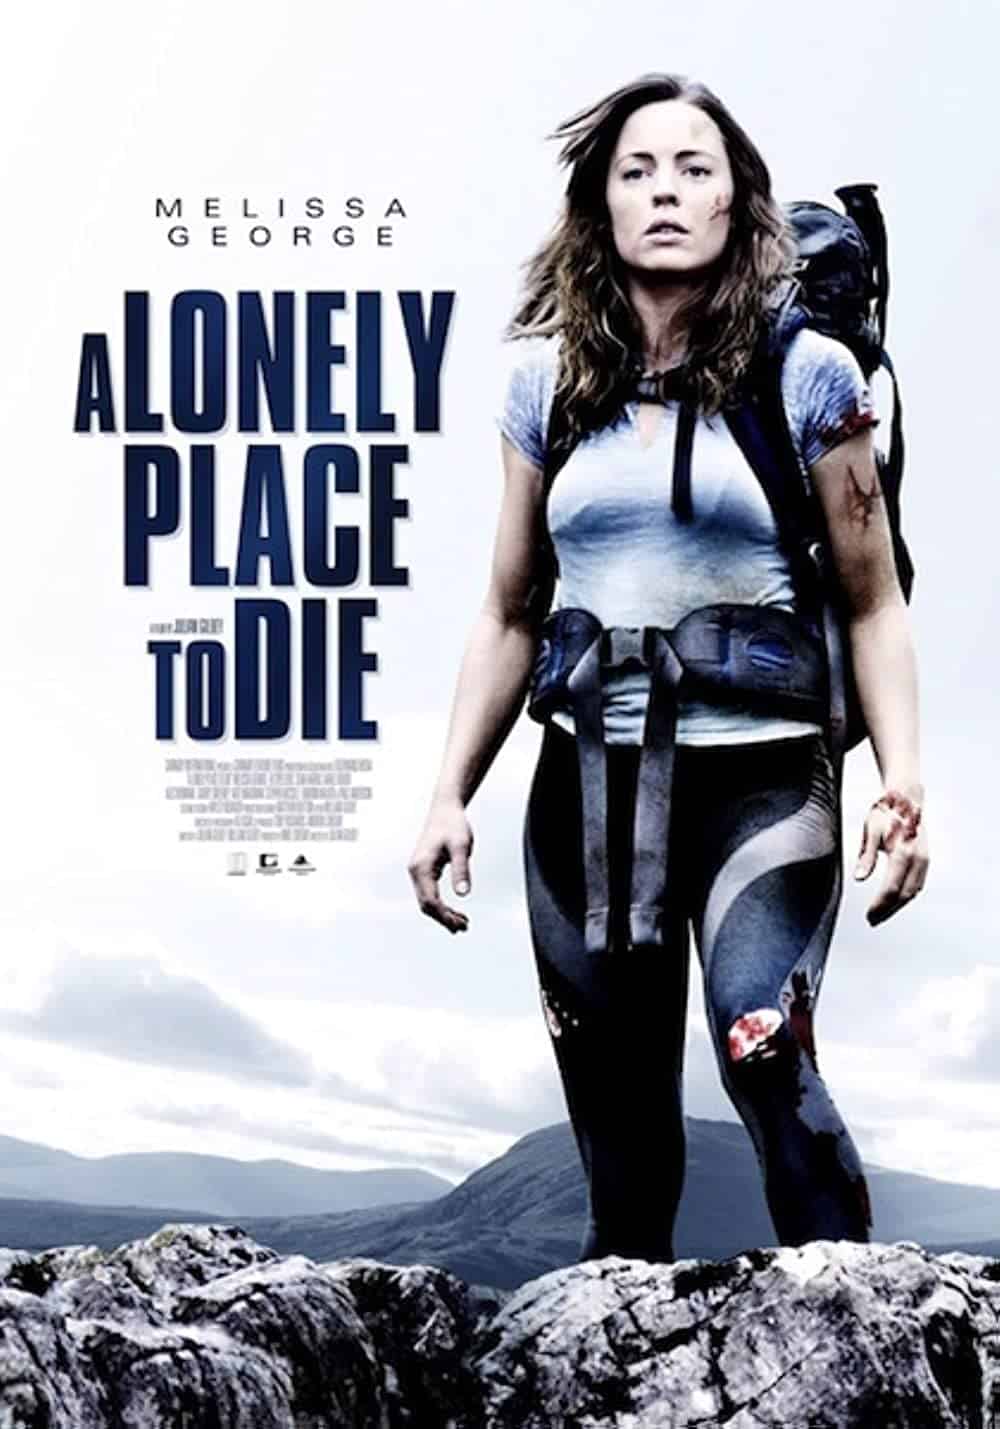 A Lonely Place To Die (2011) Best Mountaineering Movies You Can't Miss